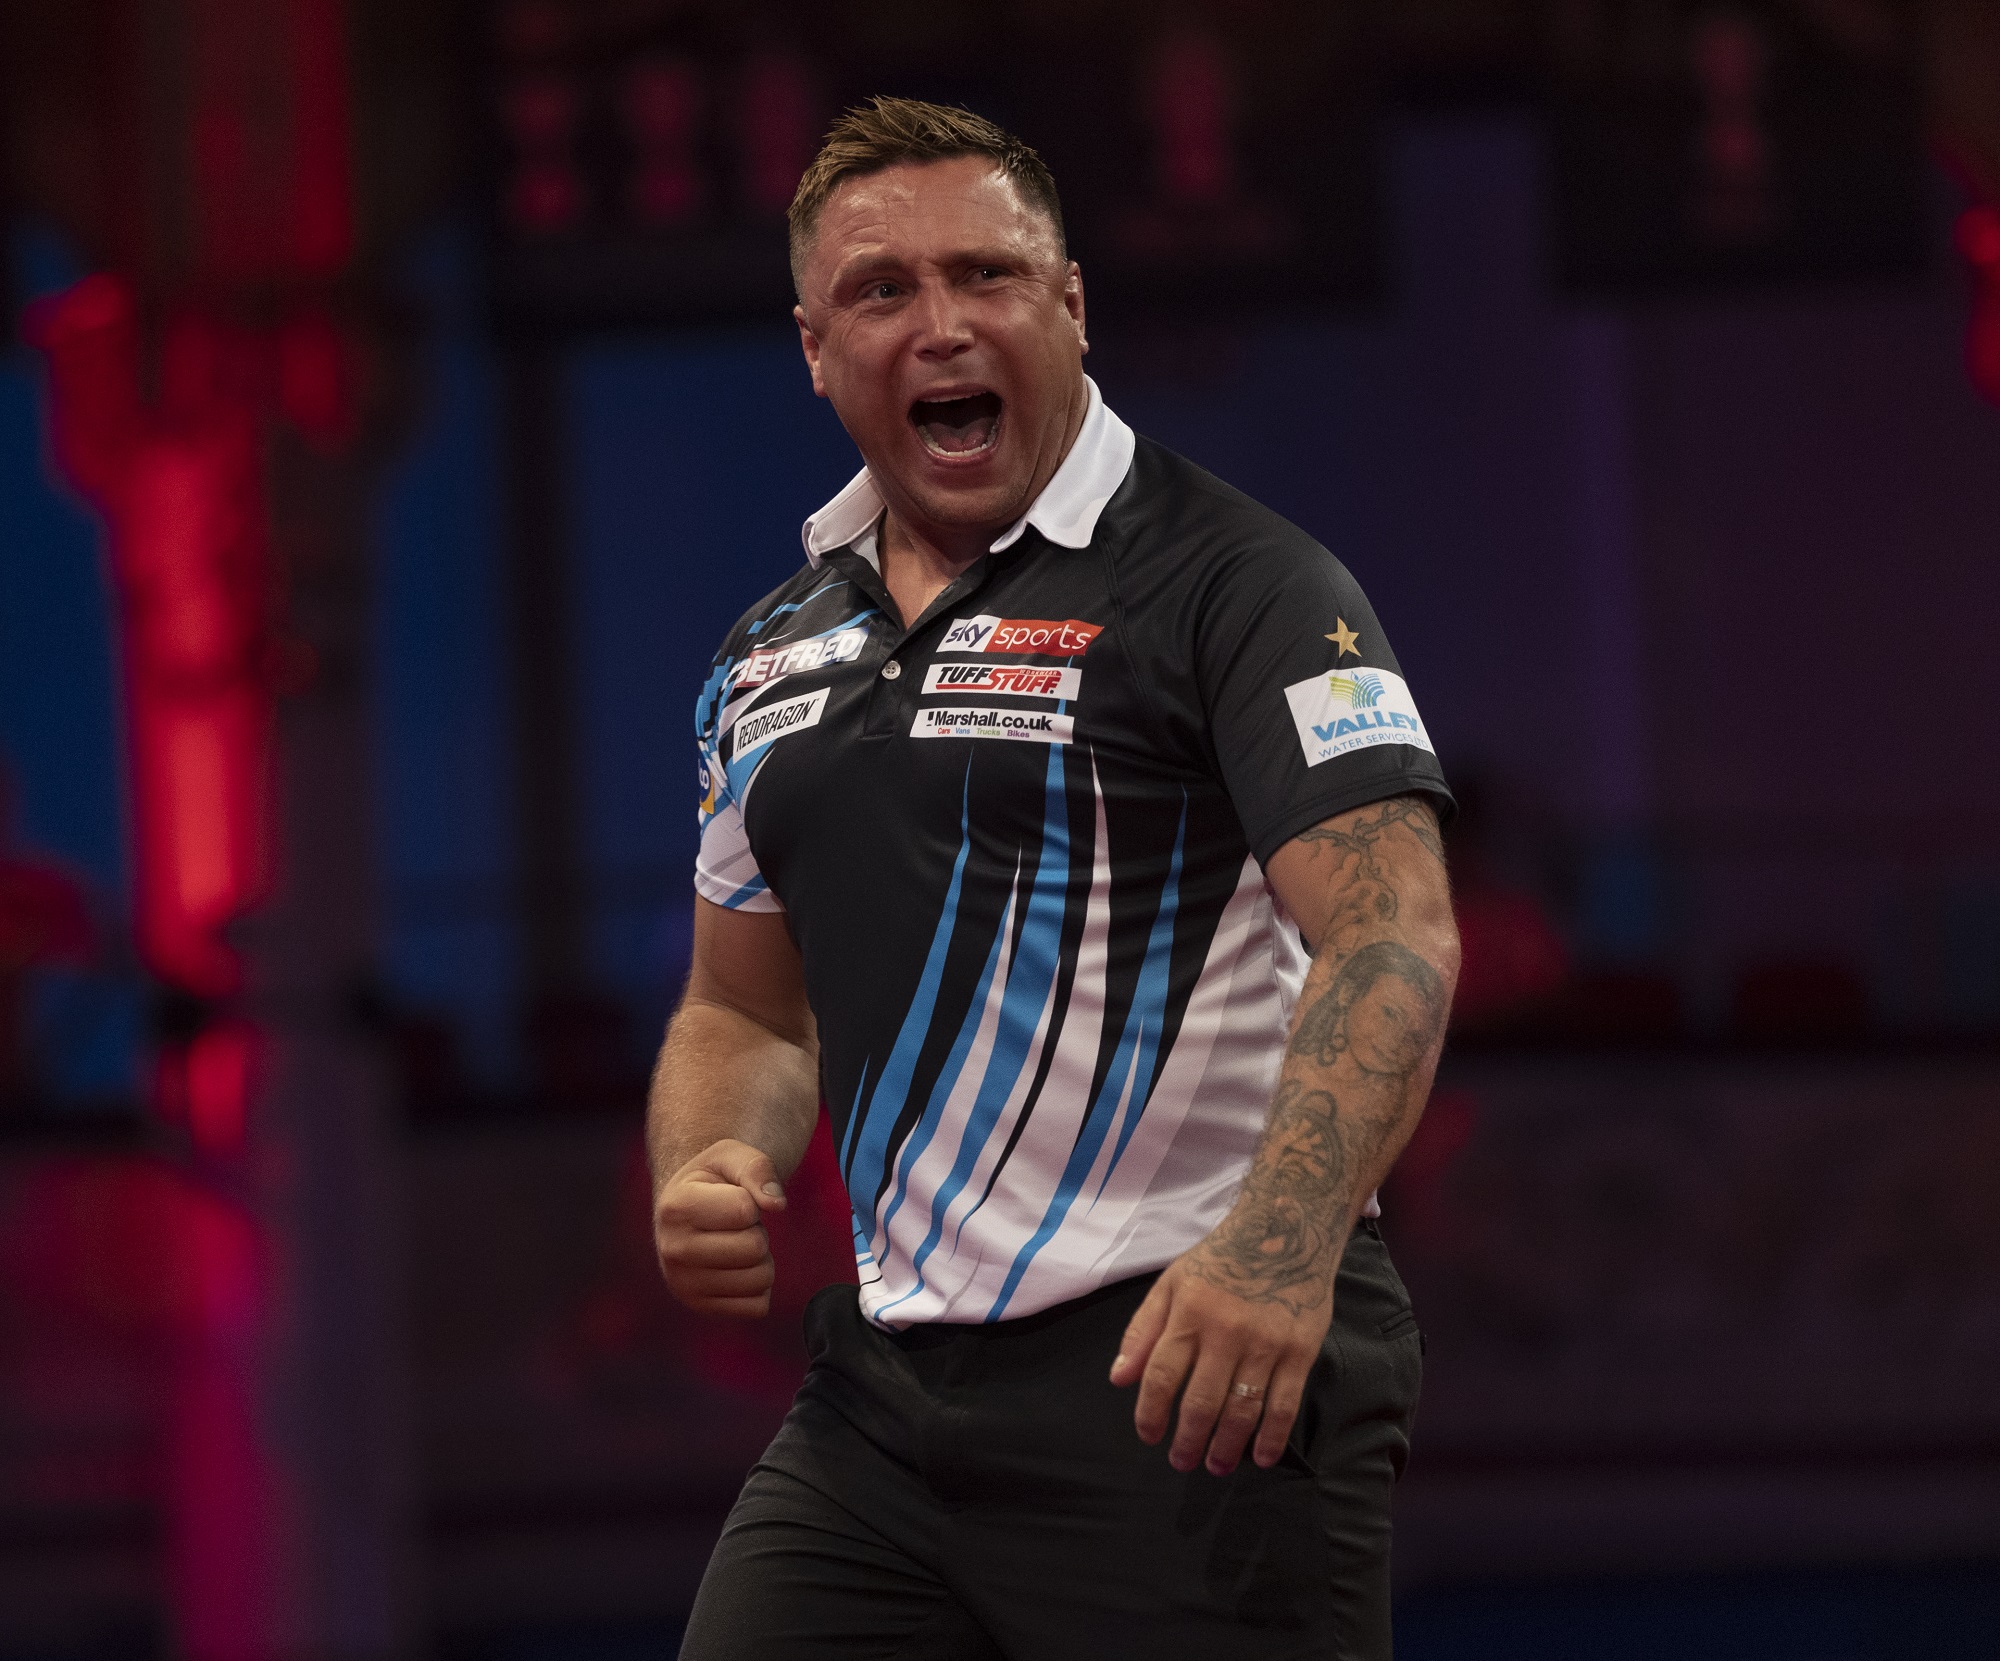 Price has a point to prove at this year's World Matchplay